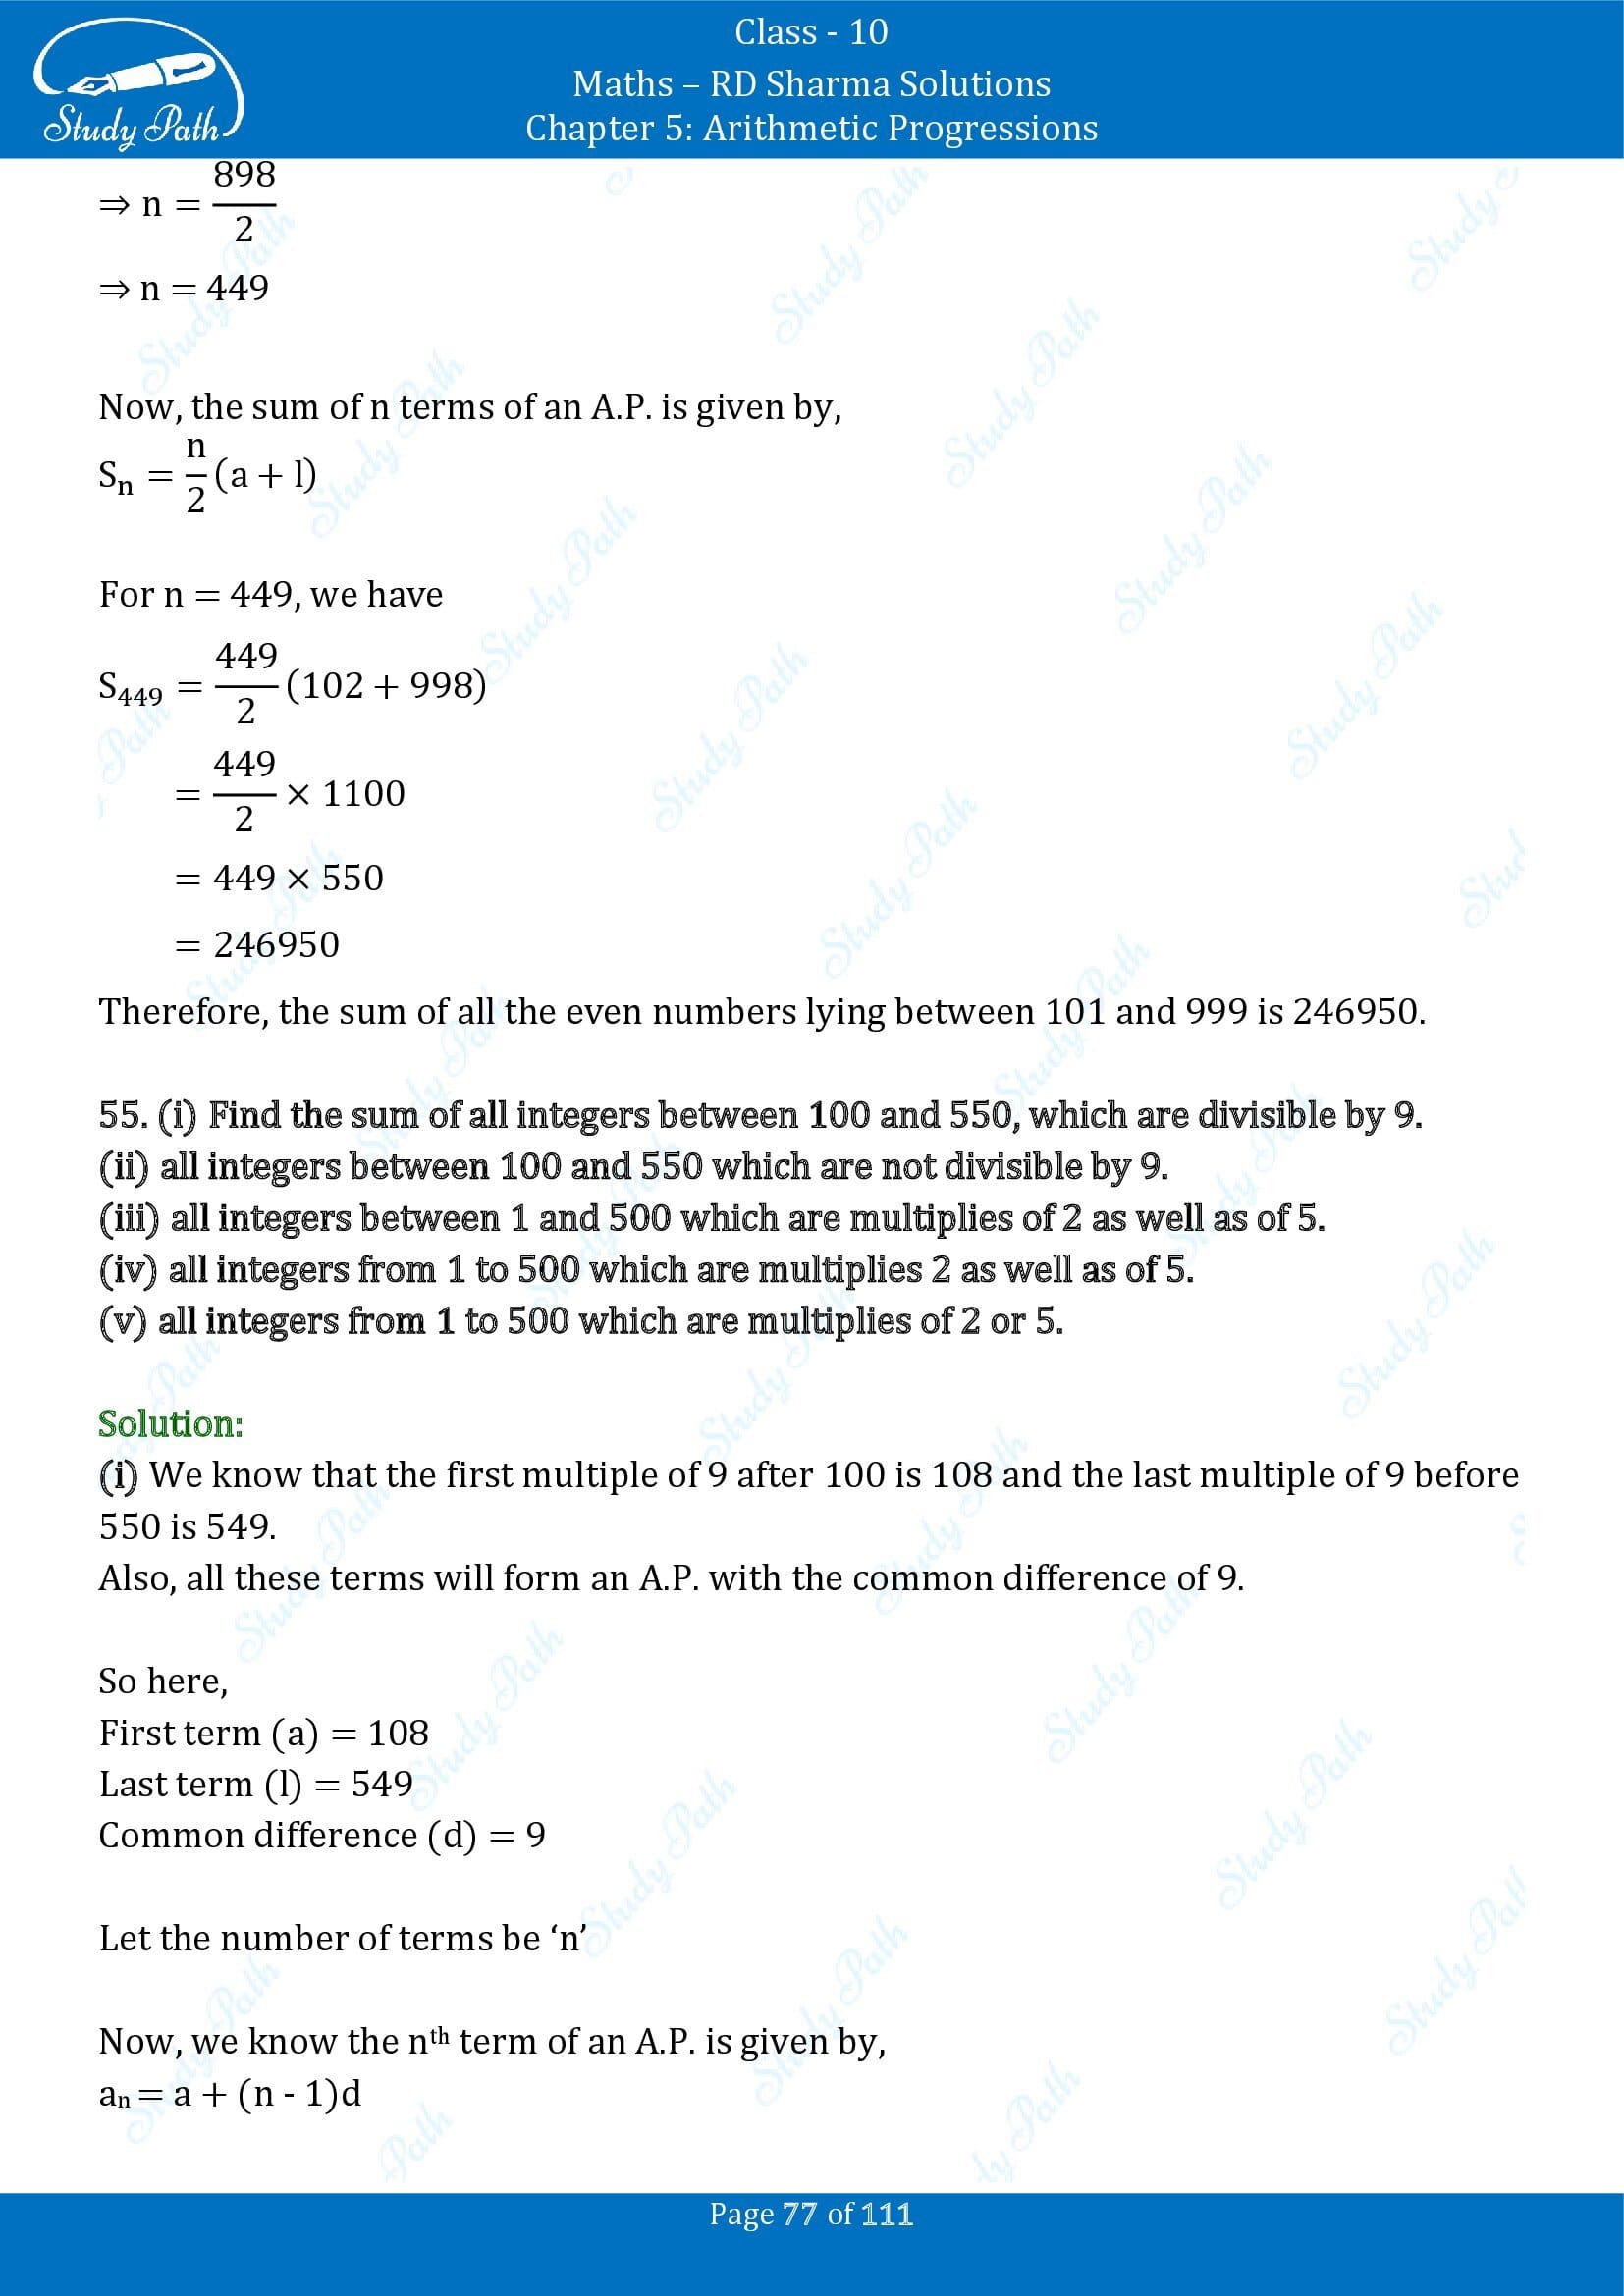 RD Sharma Solutions Class 10 Chapter 5 Arithmetic Progressions Exercise 5.6 00077